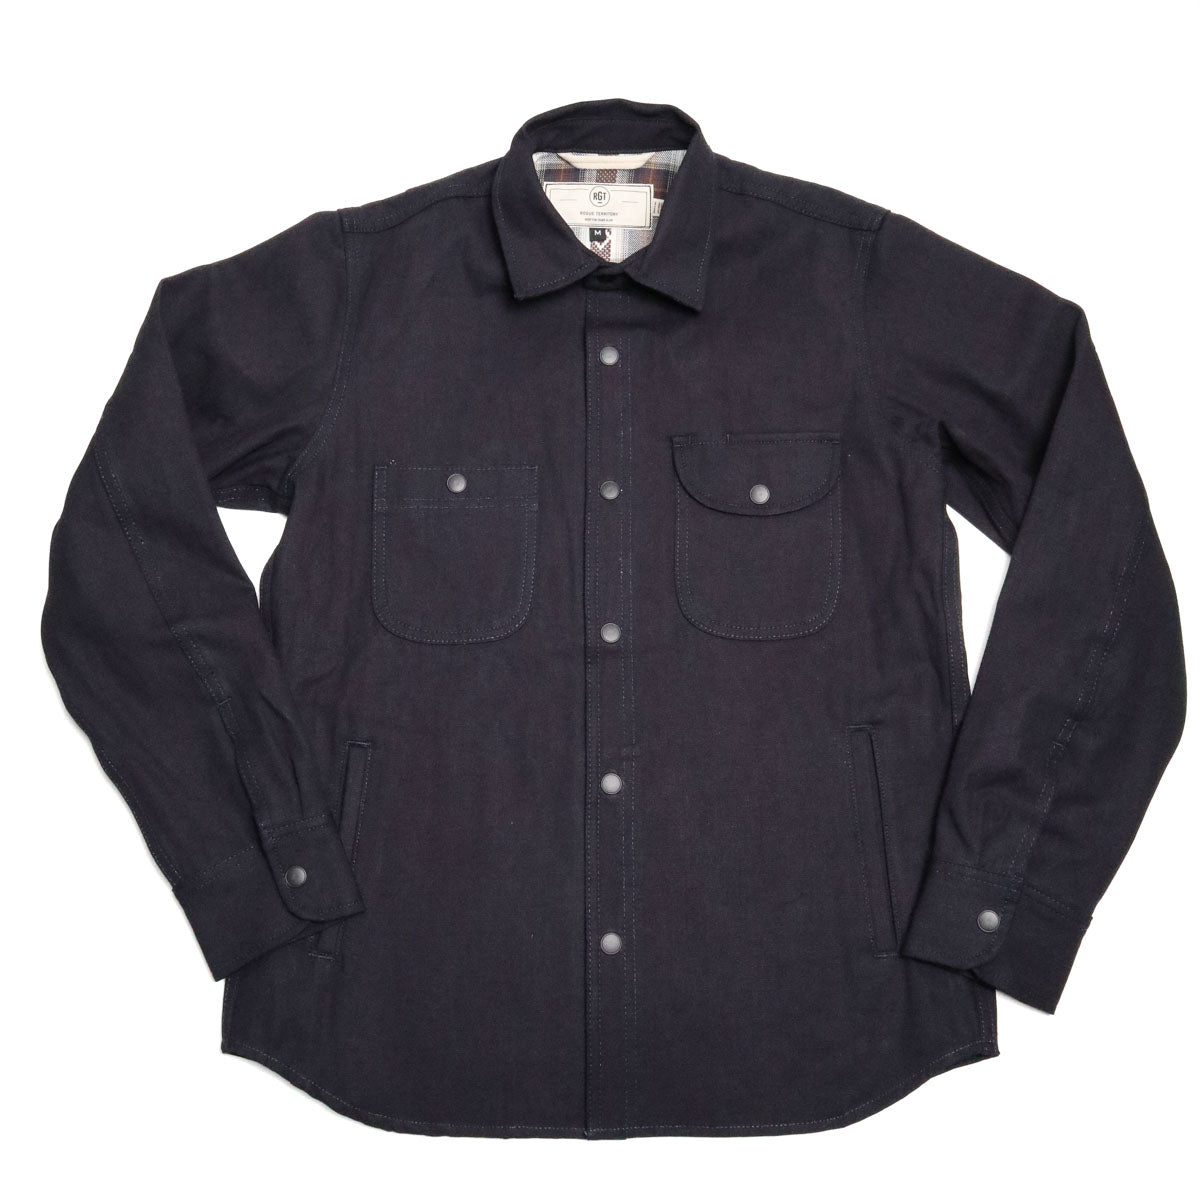 Service Shirt // Copper Flannel – Rogue Territory